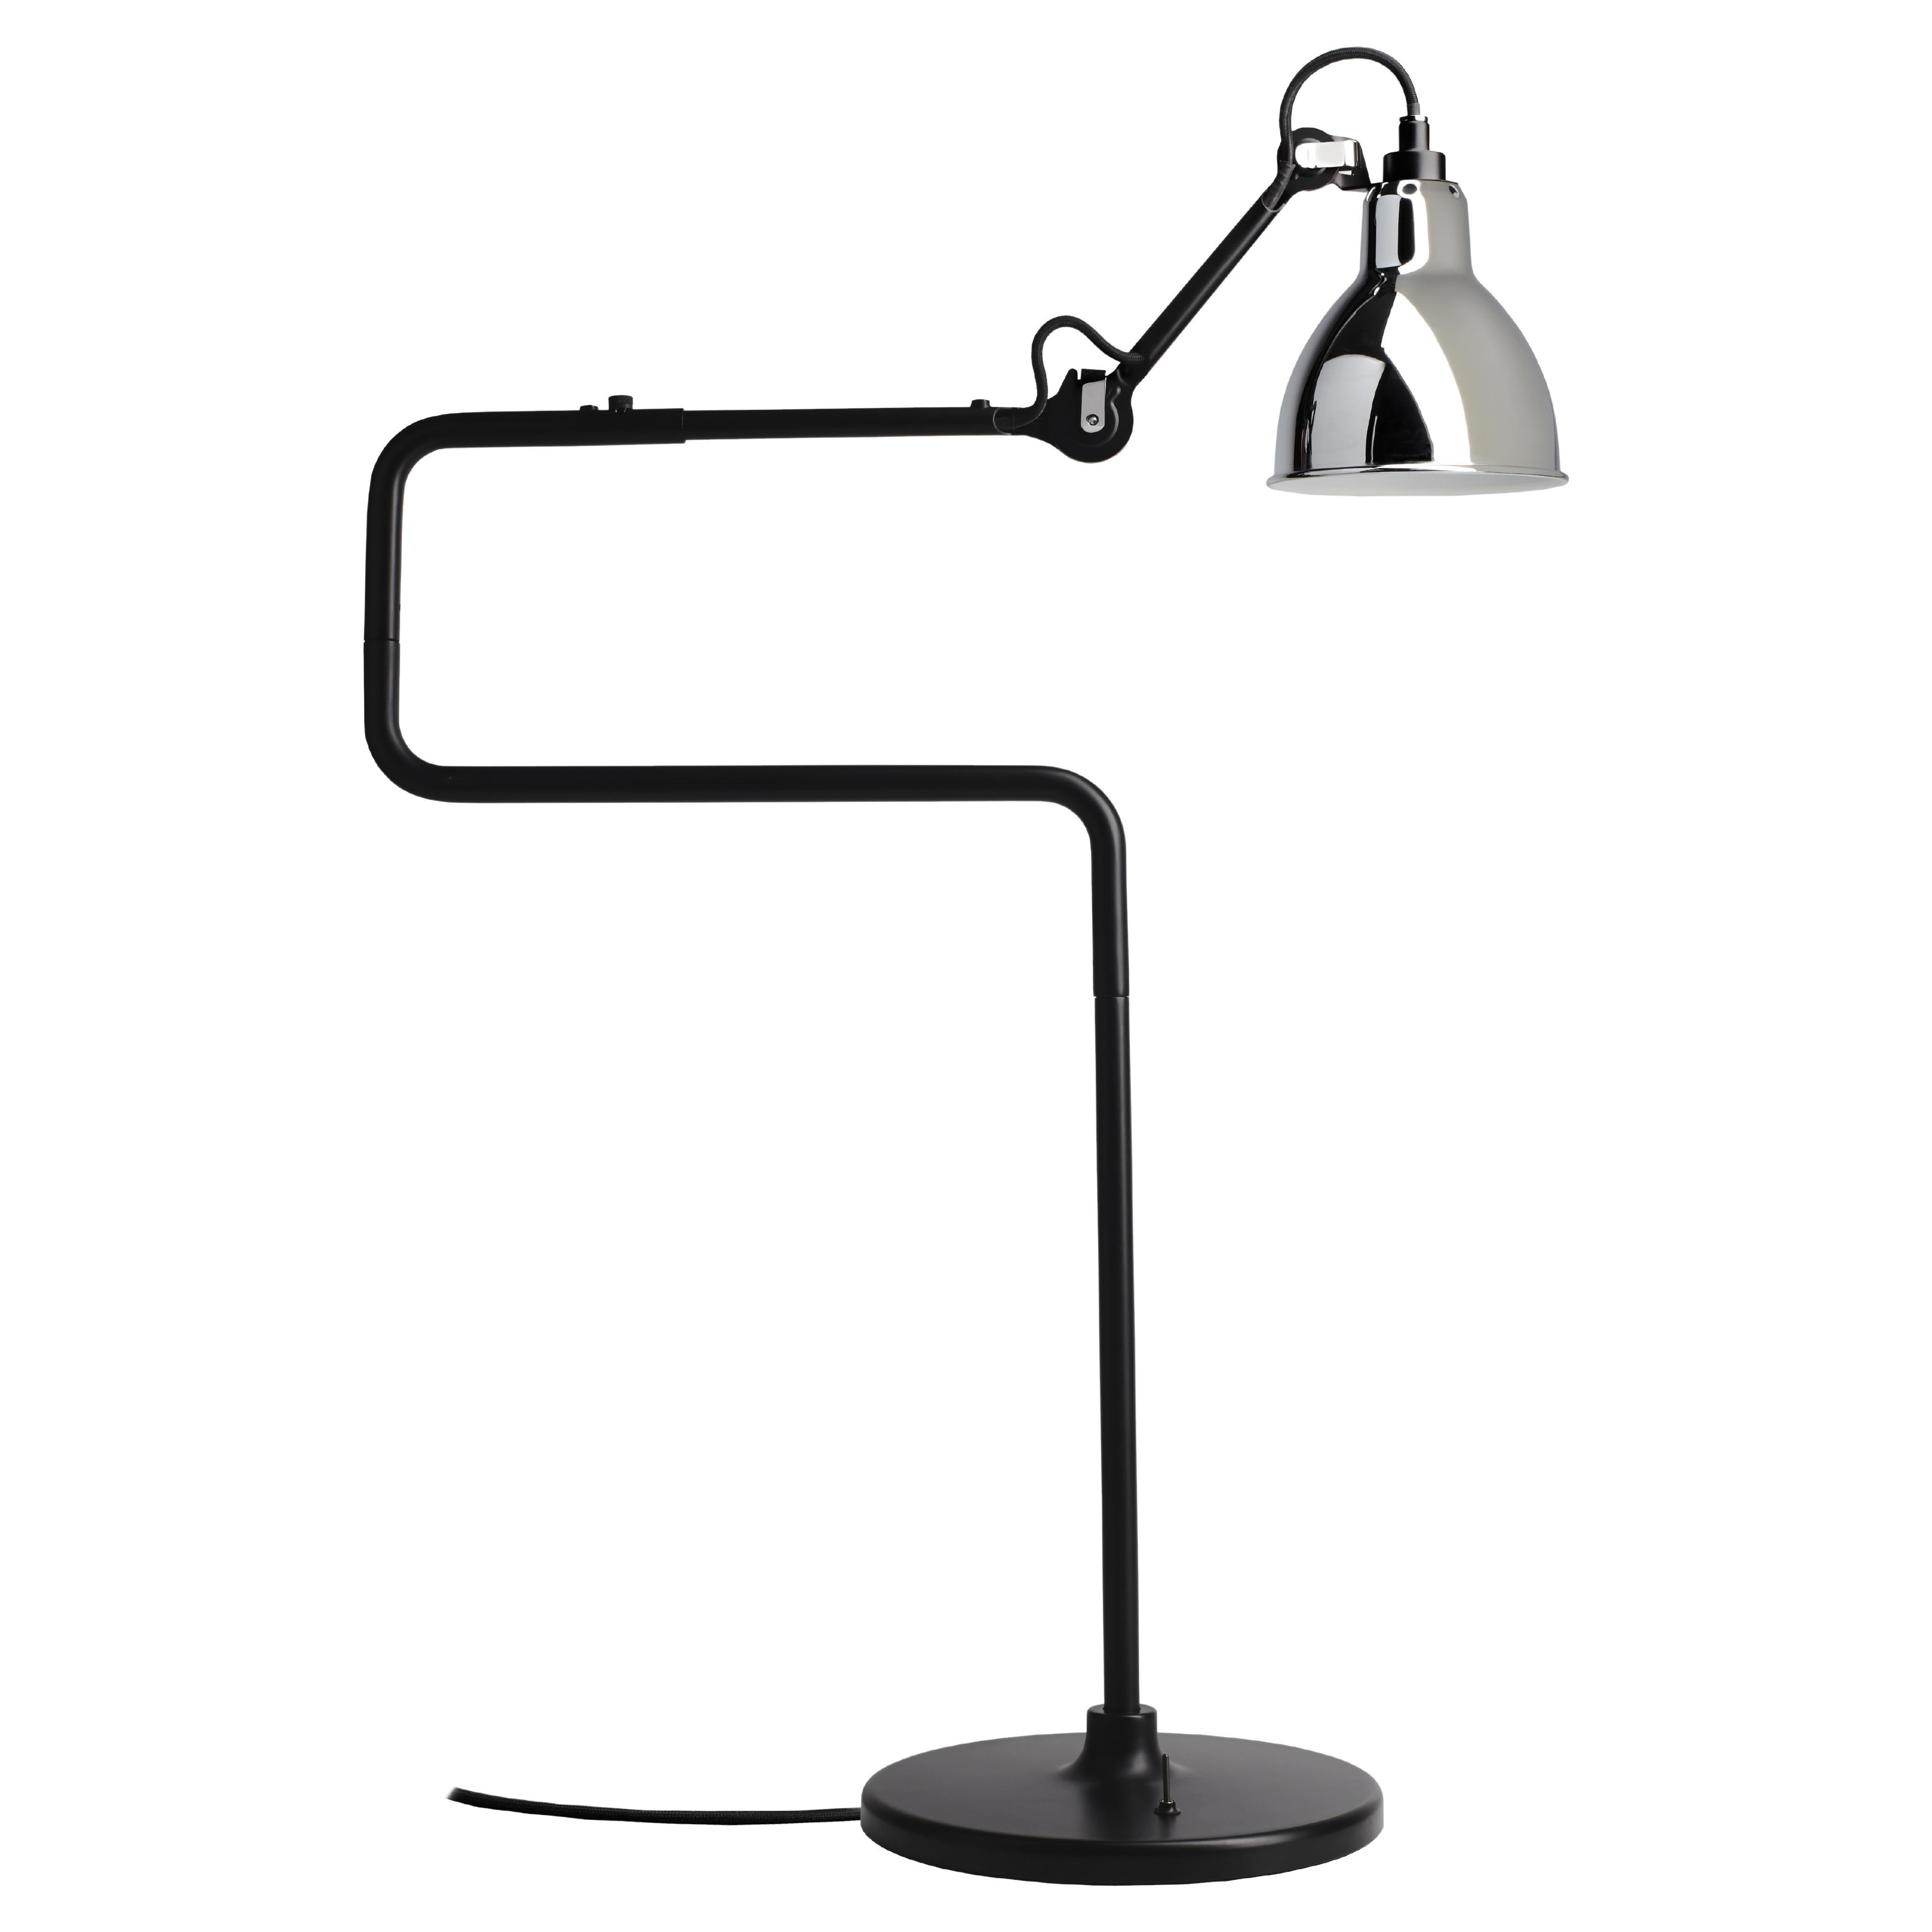 DCW Editions La Lampe Gras N°317 Table Lamp in Black Arm with Chrome Shade